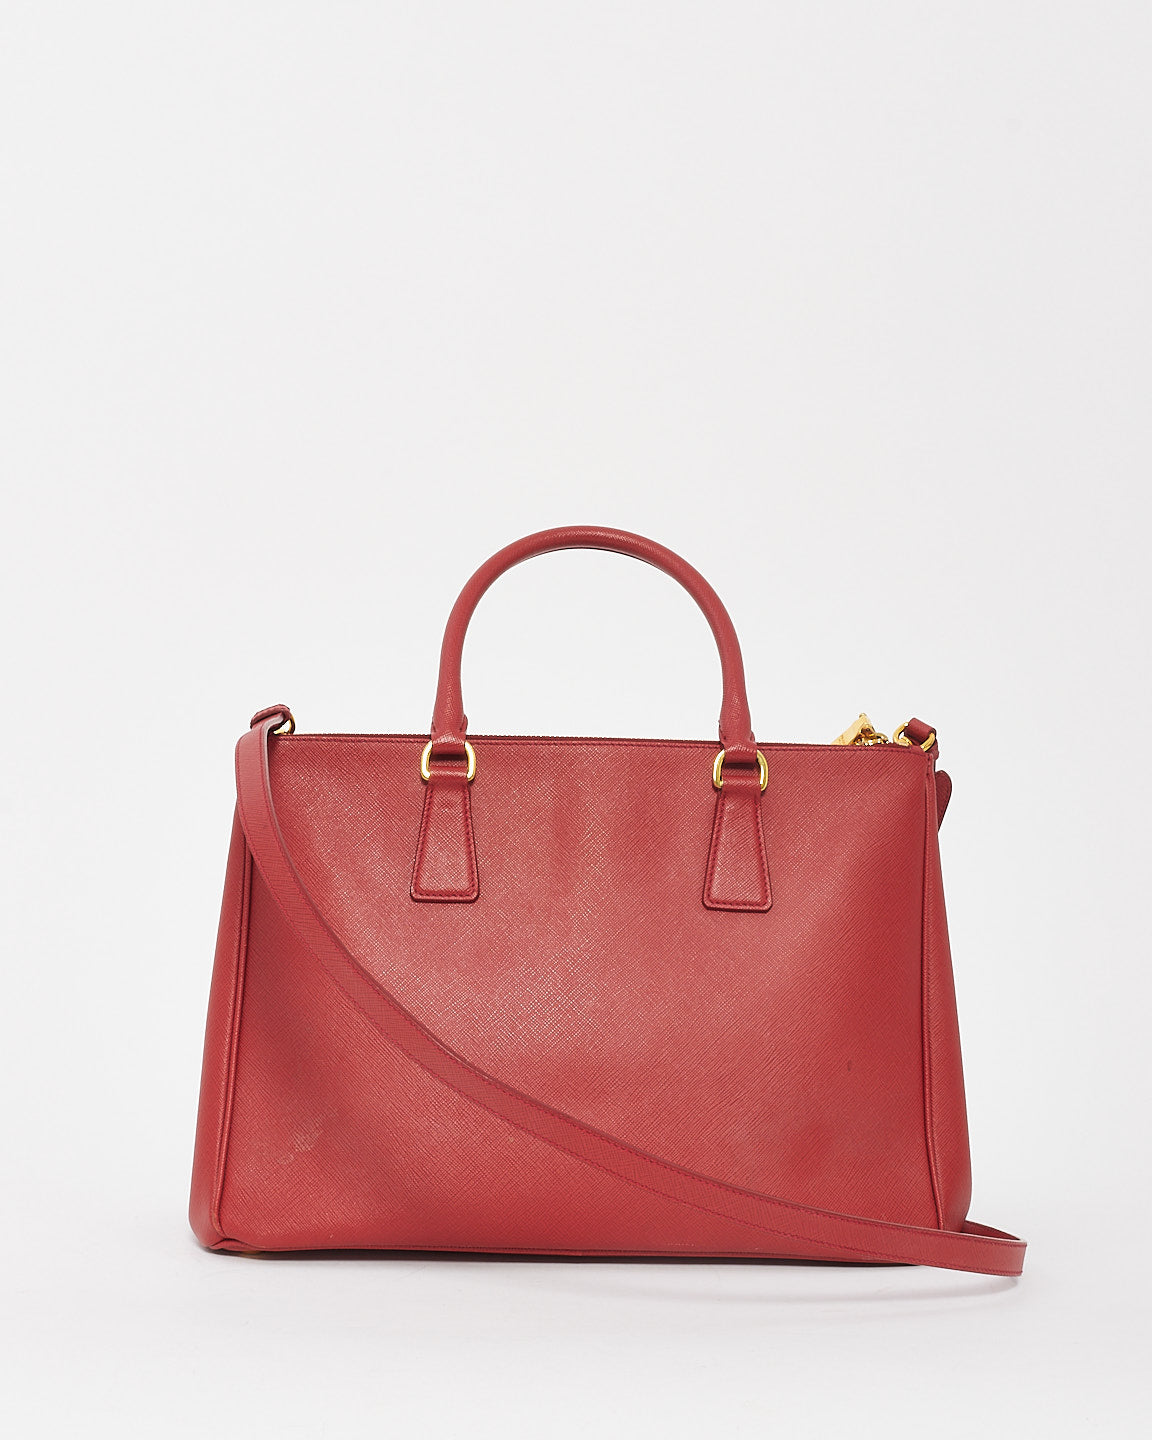 Prada Red Saffiano Leather Large Galleria Double Zip Tote Bag